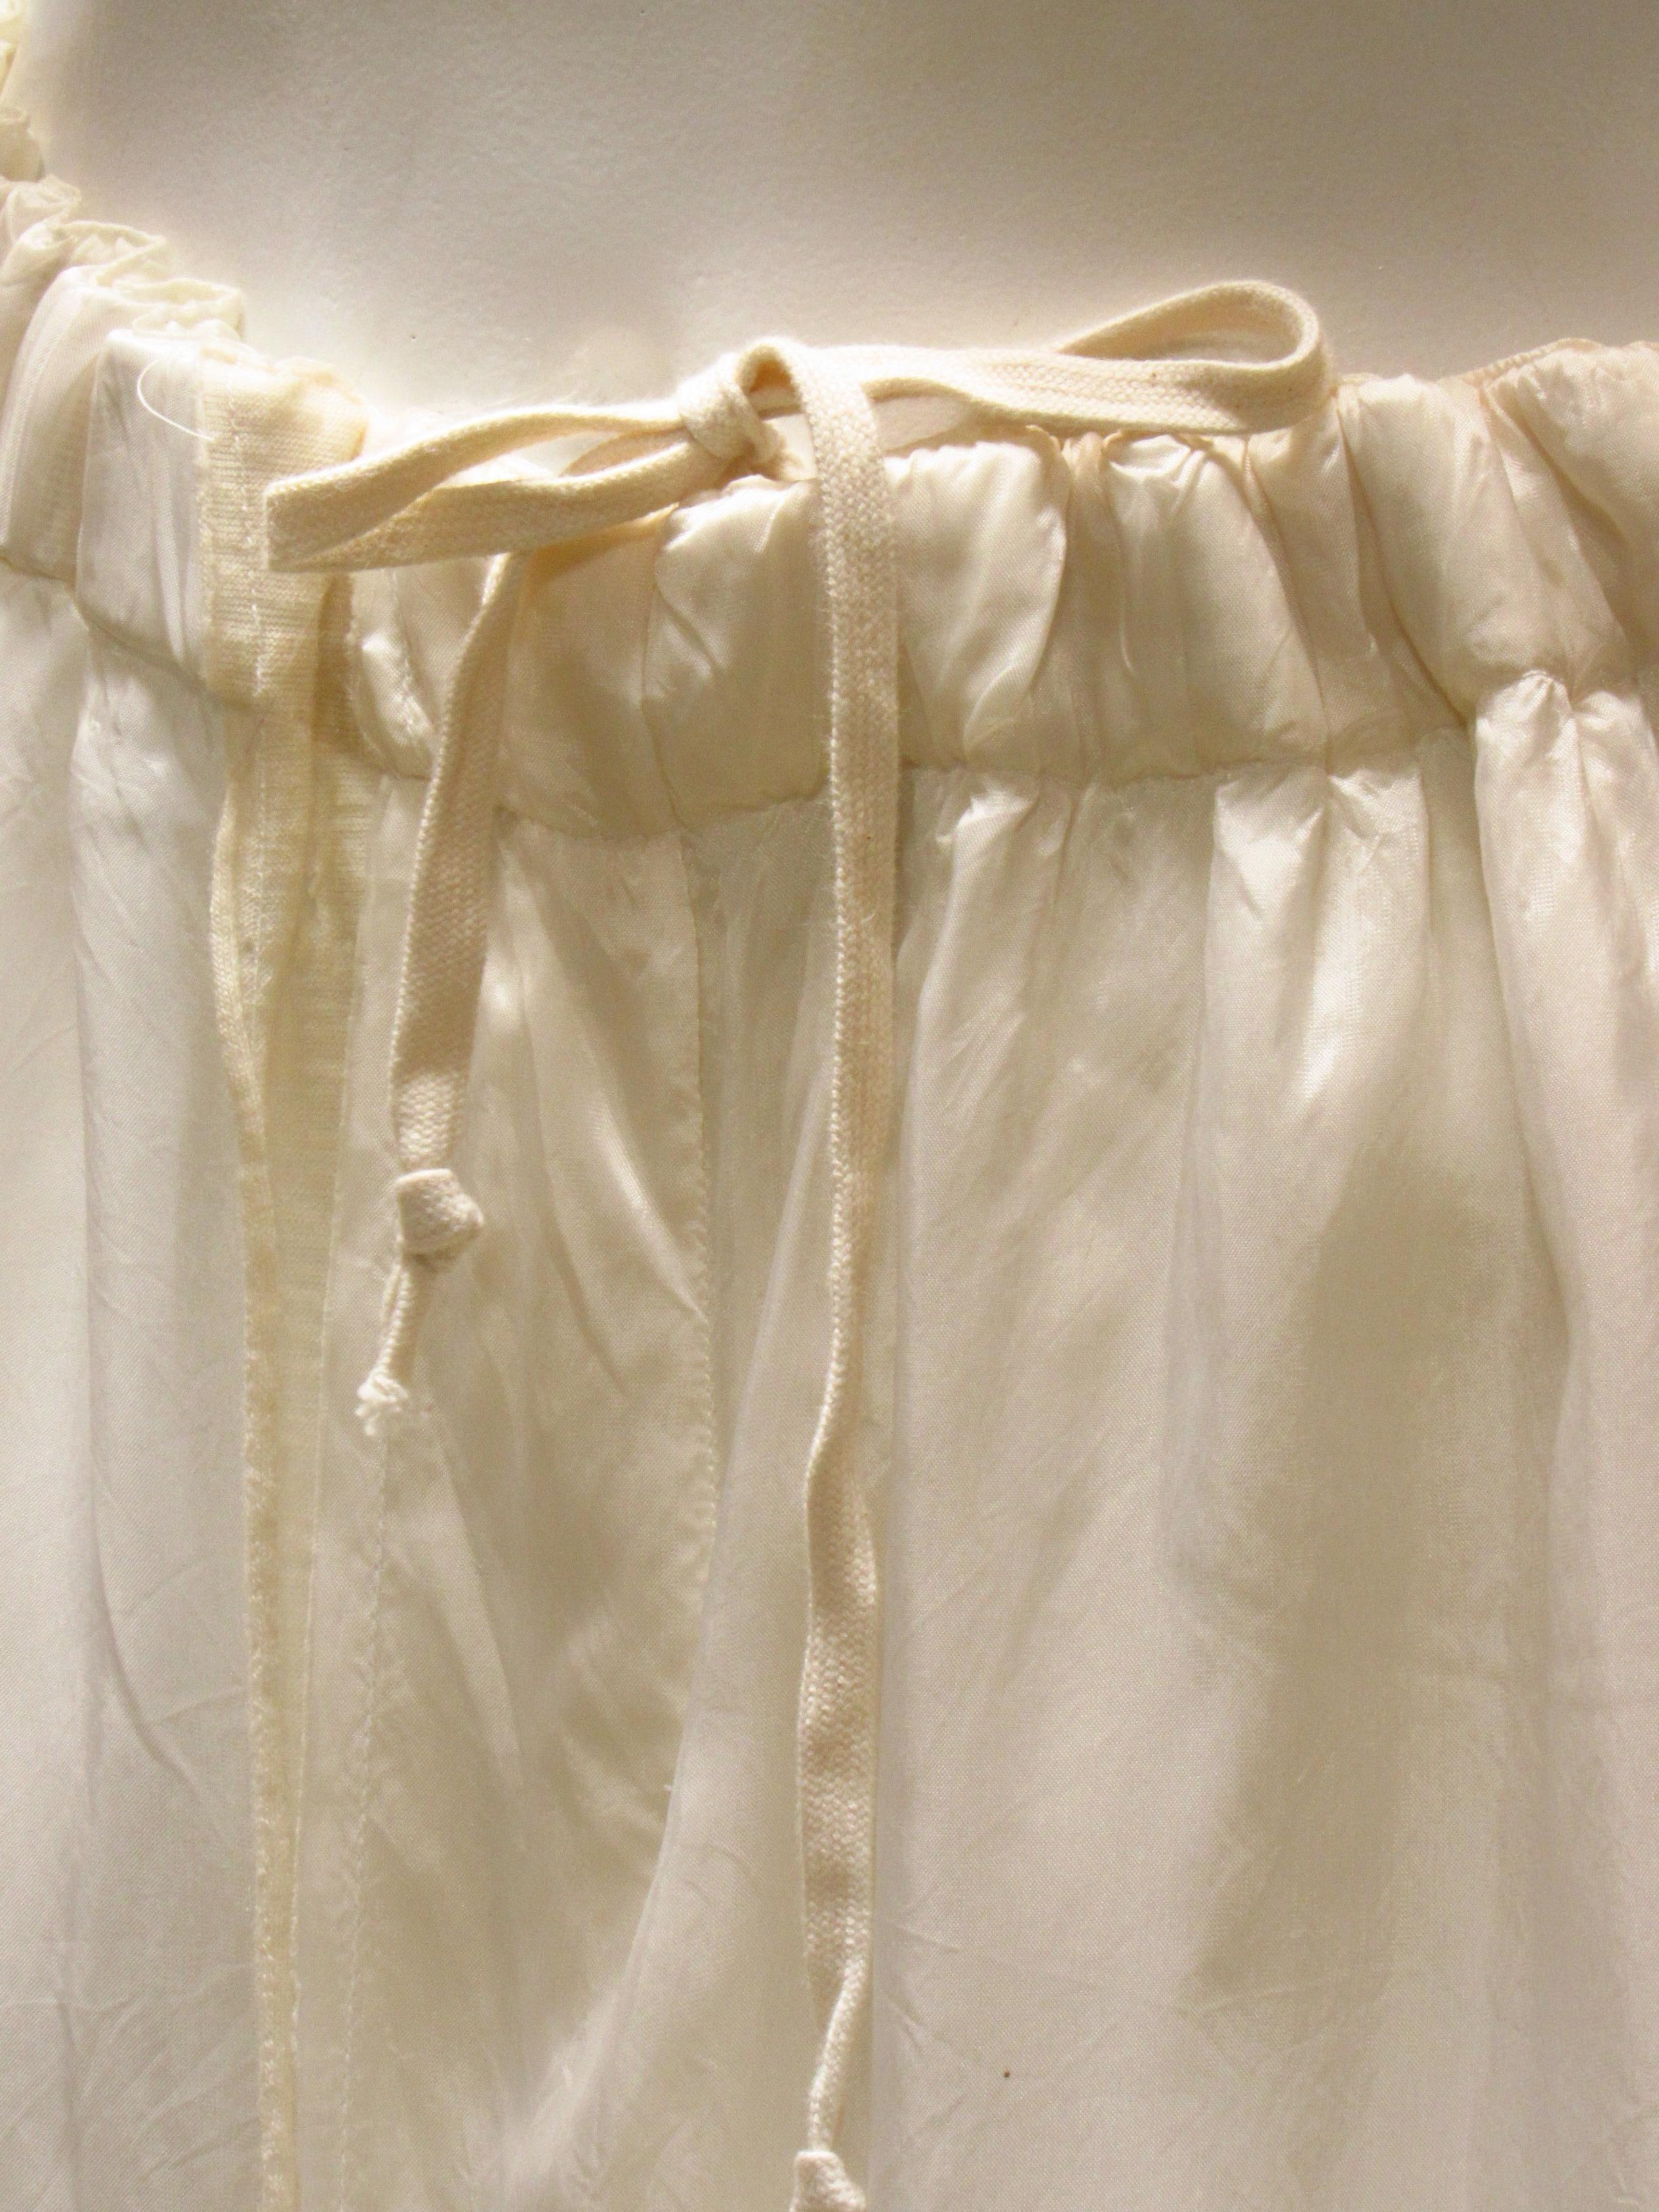 Delicate double-layered cream-colored rayon skirt is vintage Comme des Garçons, featuring a contrasting fabric front seam and the comfort of an elasticized waistband with an inner drawstring for personalized fit. There are two side-seam pockets and